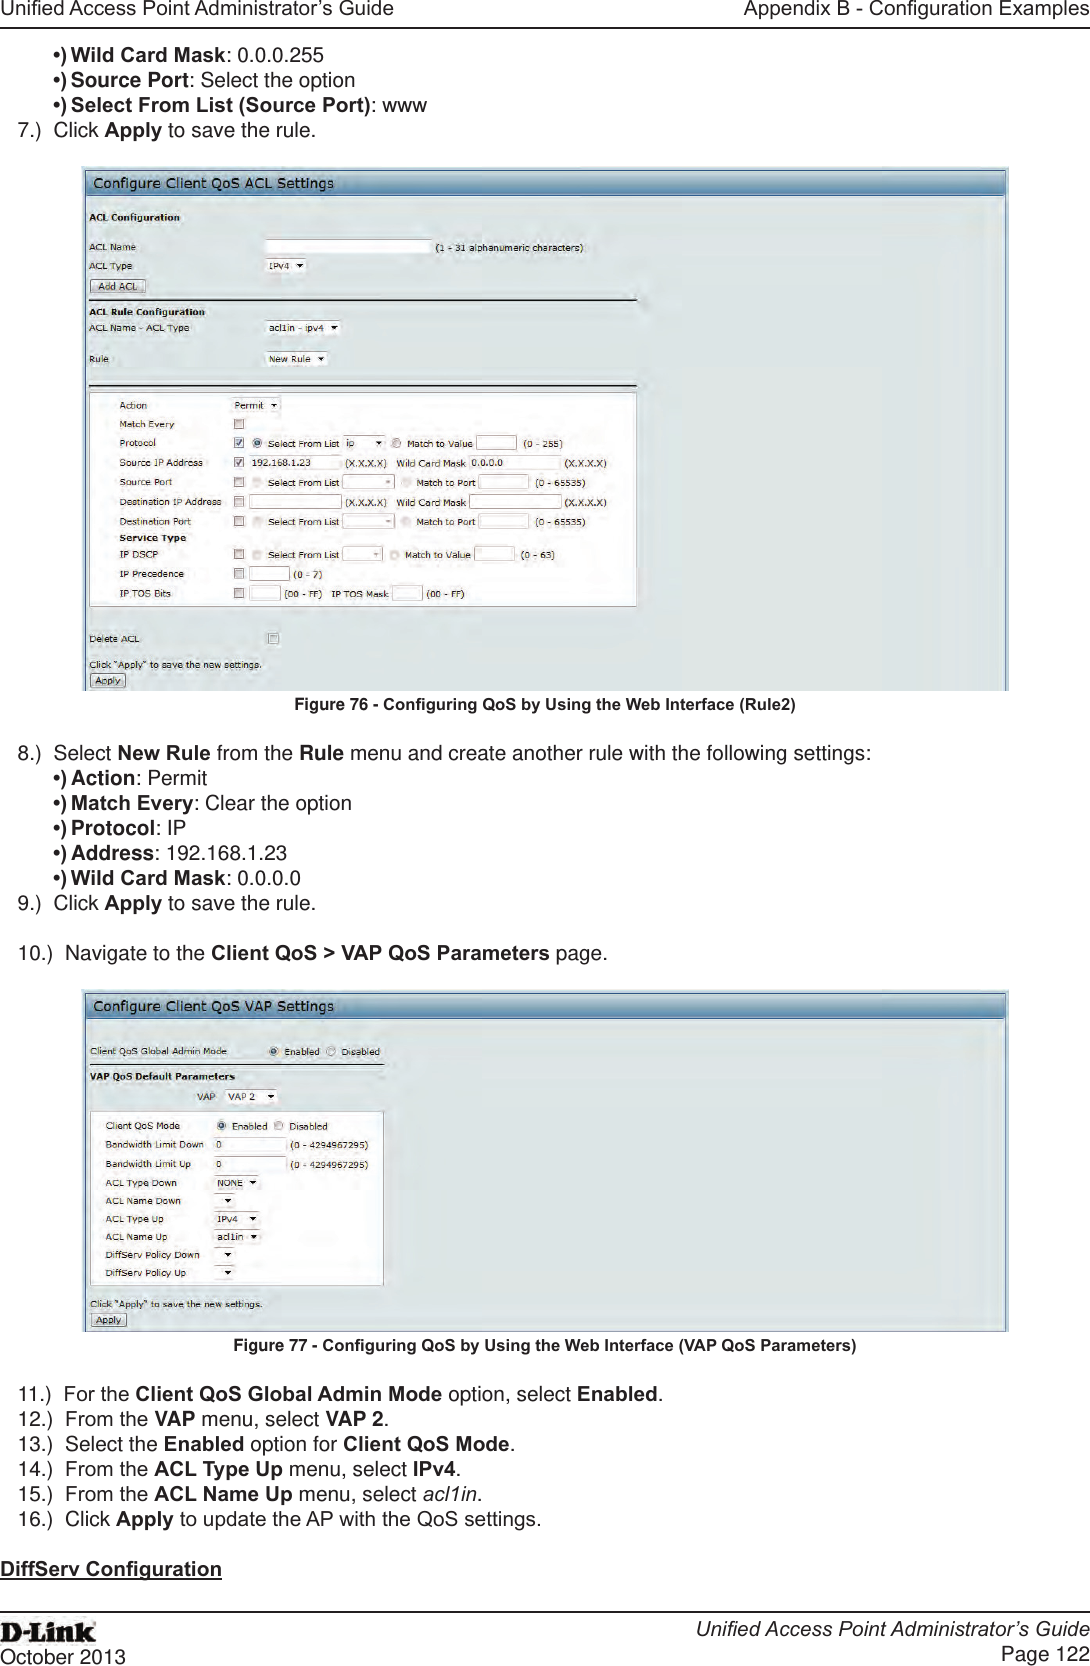 Unied Access Point Administrator’s GuideUnied Access Point Administrator’s GuidePage 122October 2013Appendix B - Conguration Examples•) Wild Card Mask: 0.0.0.255•) Source Port: Select the option•) Select From List (Source Port): www7.)  Click Apply to save the rule.Figure 76 - Conguring QoS by Using the Web Interface (Rule2)8.)  Select New Rule from the Rule menu and create another rule with the following settings:•) Action: Permit•) Match Every: Clear the option•) Protocol: IP•) Address: 192.168.1.23•) Wild Card Mask: 0.0.0.09.)  Click Apply to save the rule.10.)  Navigate to the Client QoS &gt; VAP QoS Parameters page.Figure 77 - Conguring QoS by Using the Web Interface (VAP QoS Parameters)11.)  For the Client QoS Global Admin Mode option, select Enabled.12.)  From the VAP menu, select VAP 2.13.)  Select the Enabled option for Client QoS Mode.14.)  From the ACL Type Up menu, select IPv4.15.)  From the ACL Name Up menu, select acl1in.16.)  Click Apply to update the AP with the QoS settings.DiffServ Conguration